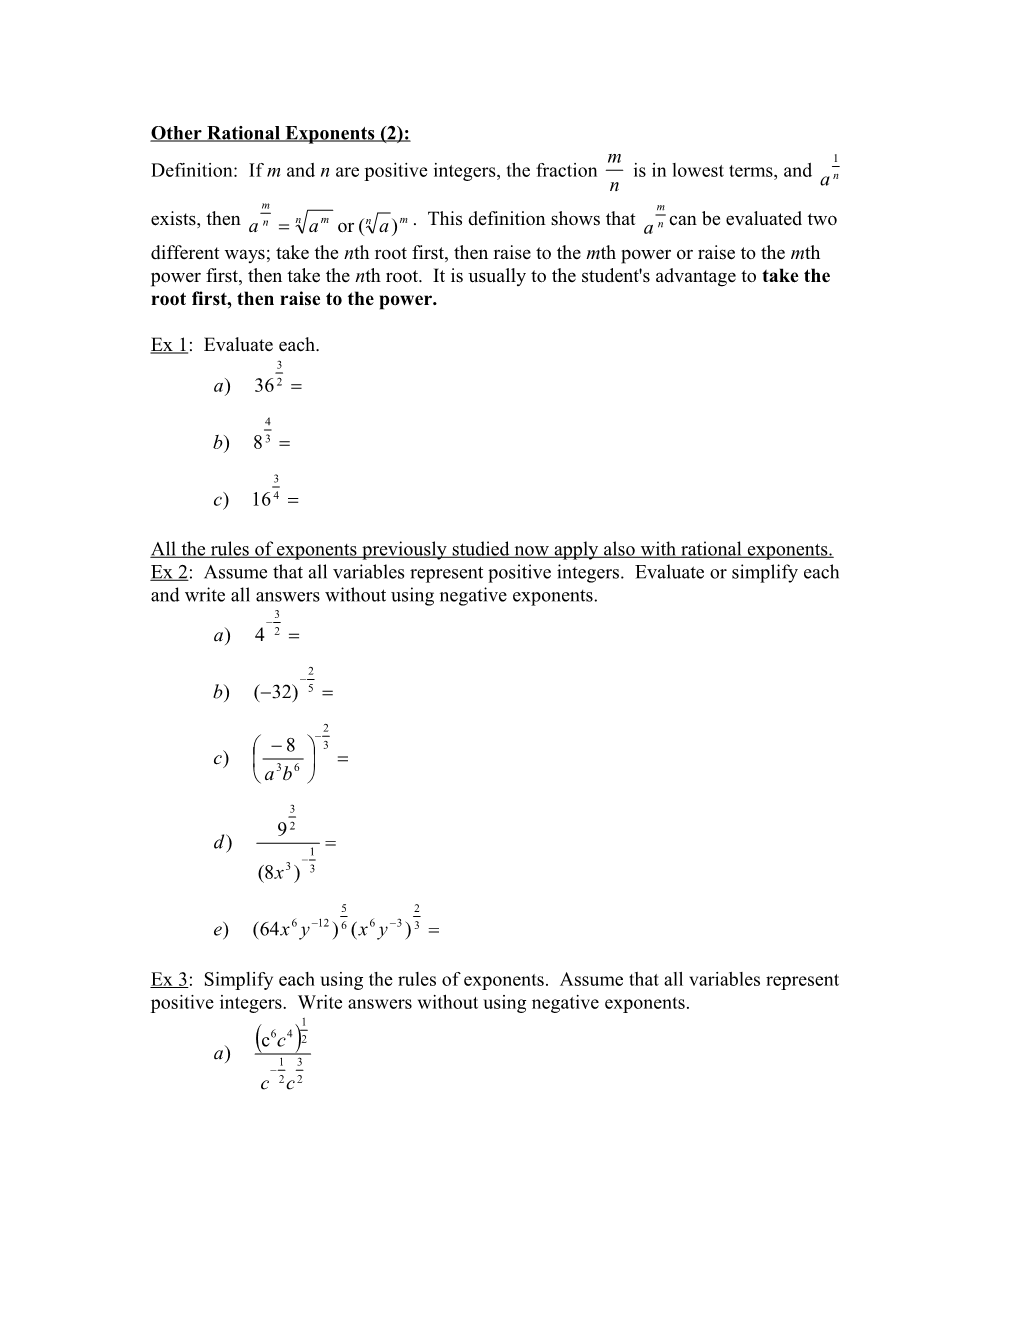 Definition of a Rational Exponent (1)